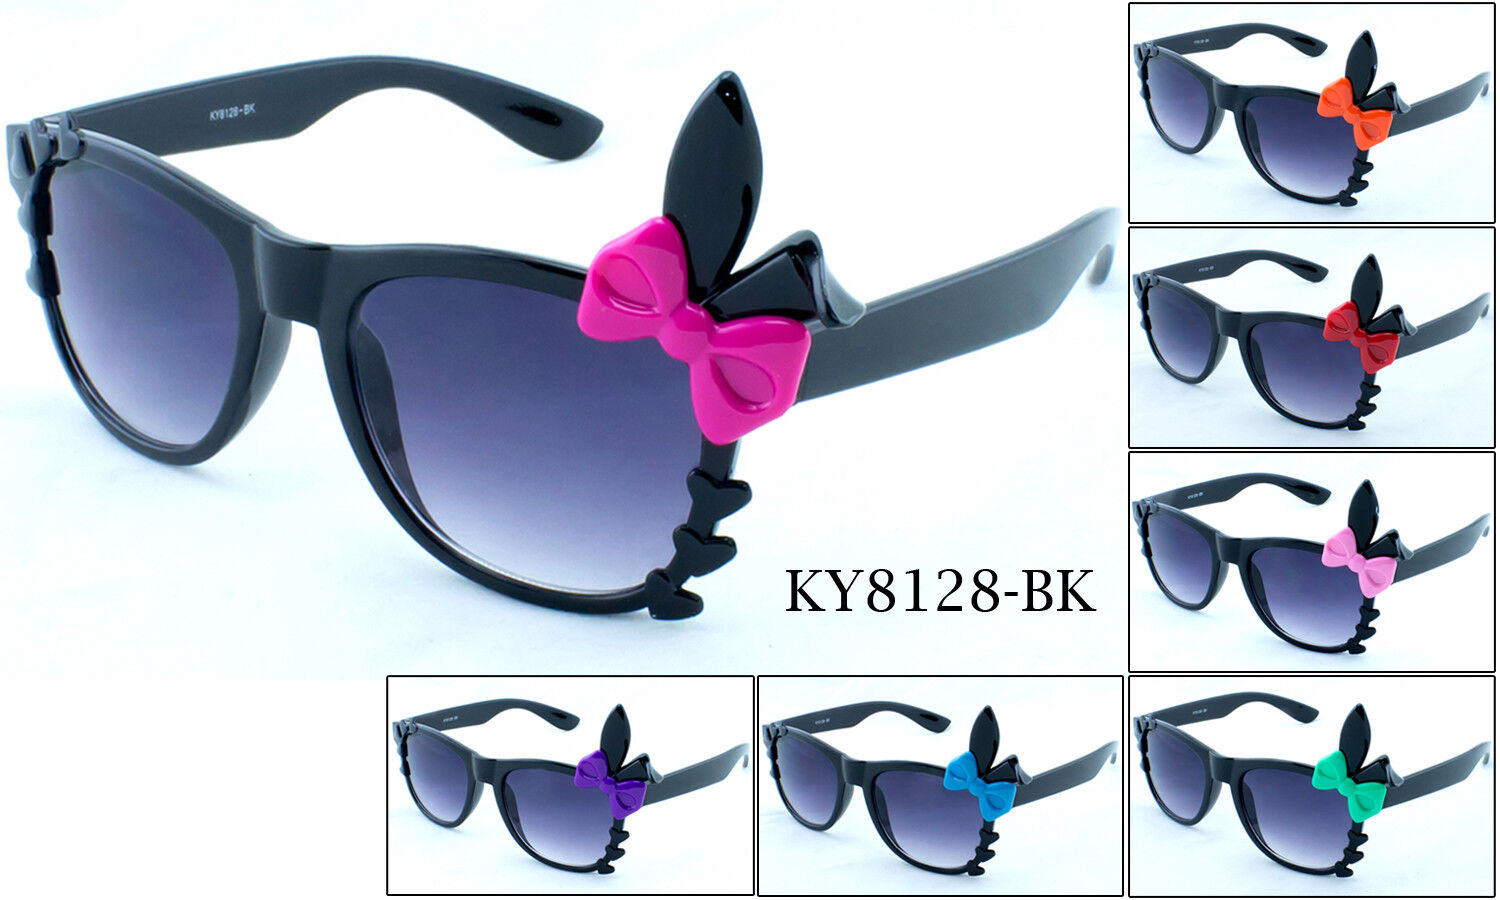 Bunny Ears Sunglasses Fun Party Glasses Colorful Cute Heart Accent UV Protection